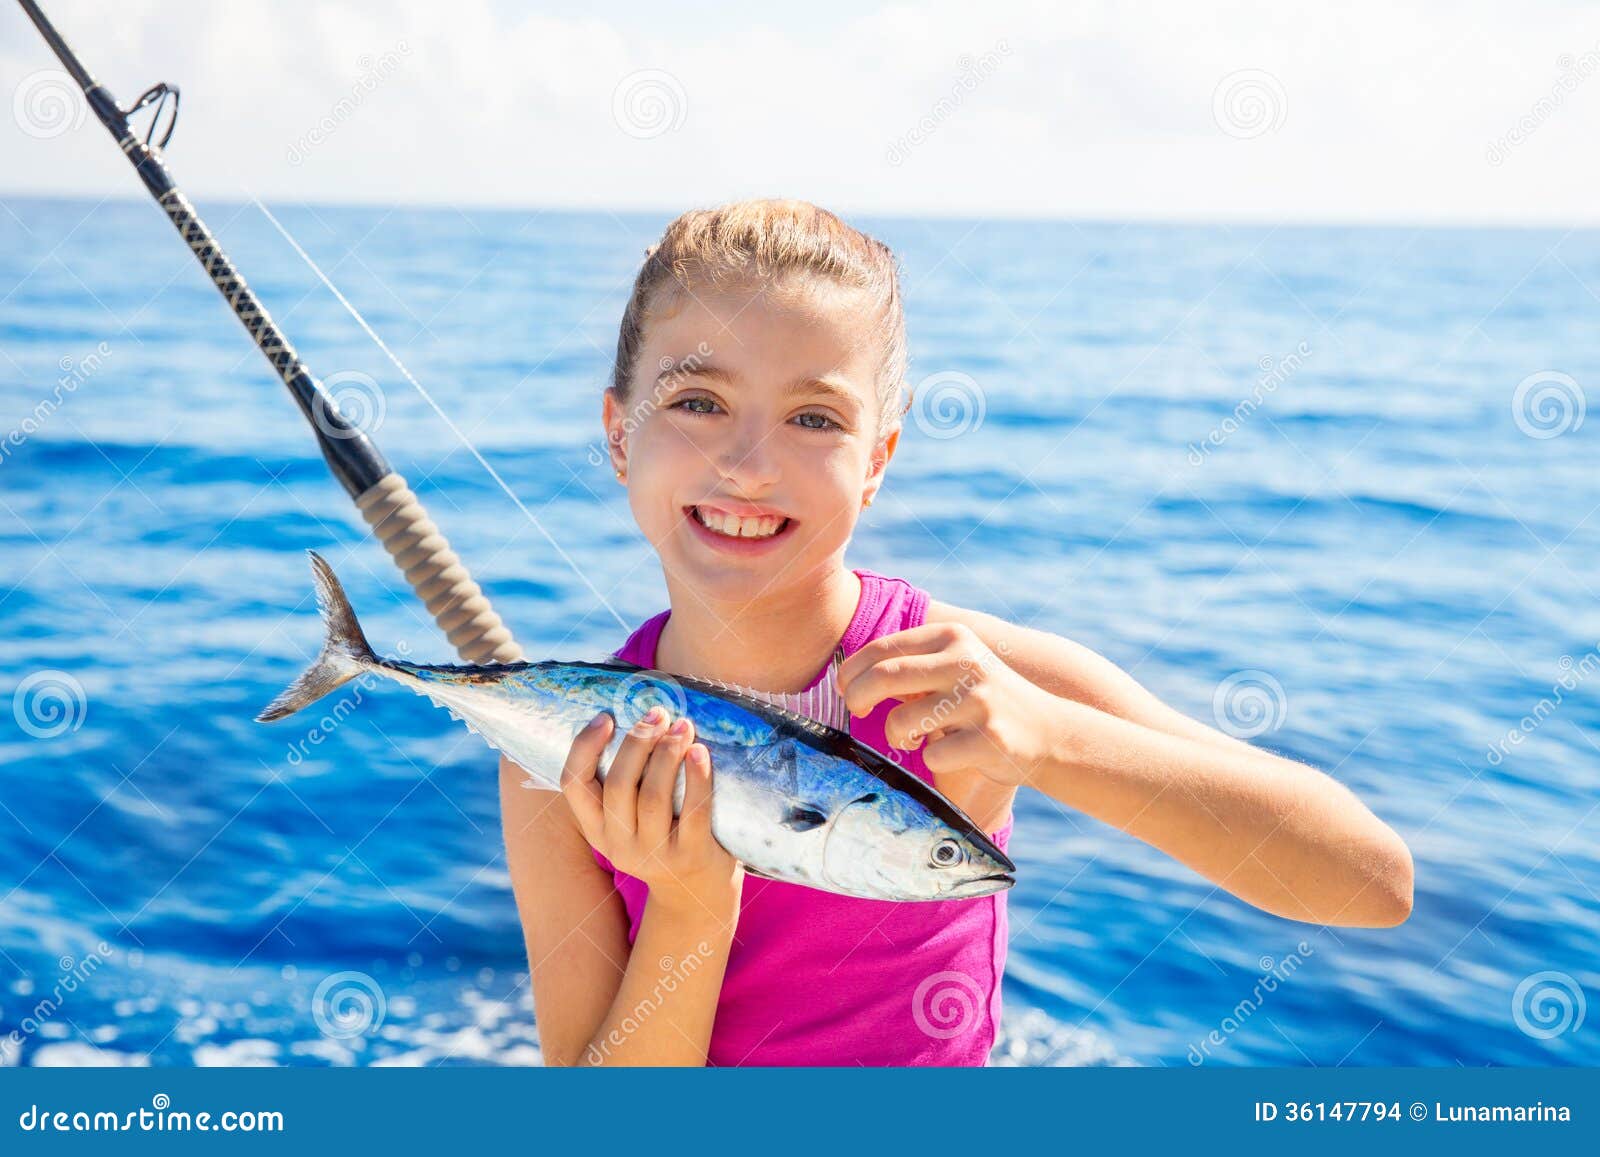 Kid Girl Fishing Tuna Little Tunny Happy With Fish Catch Stock Images 